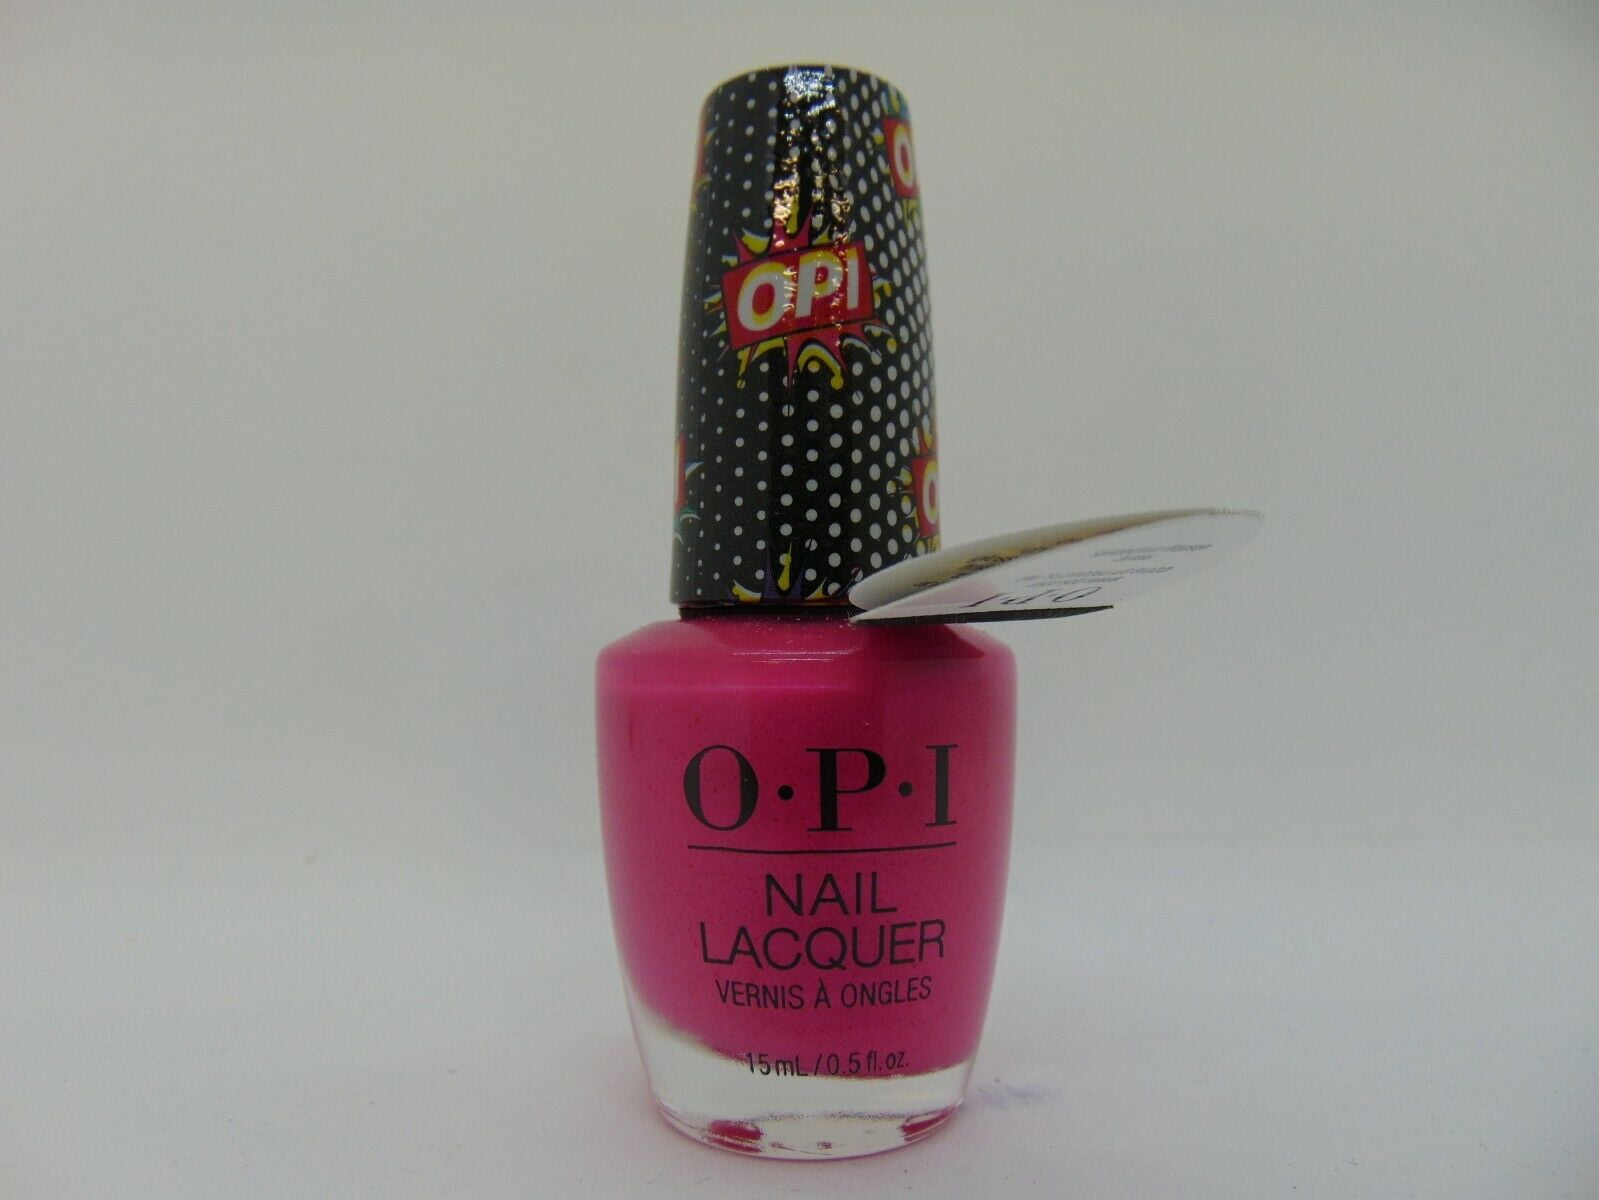 OPI Nail Lacquer in "Mod About You" - wide 5